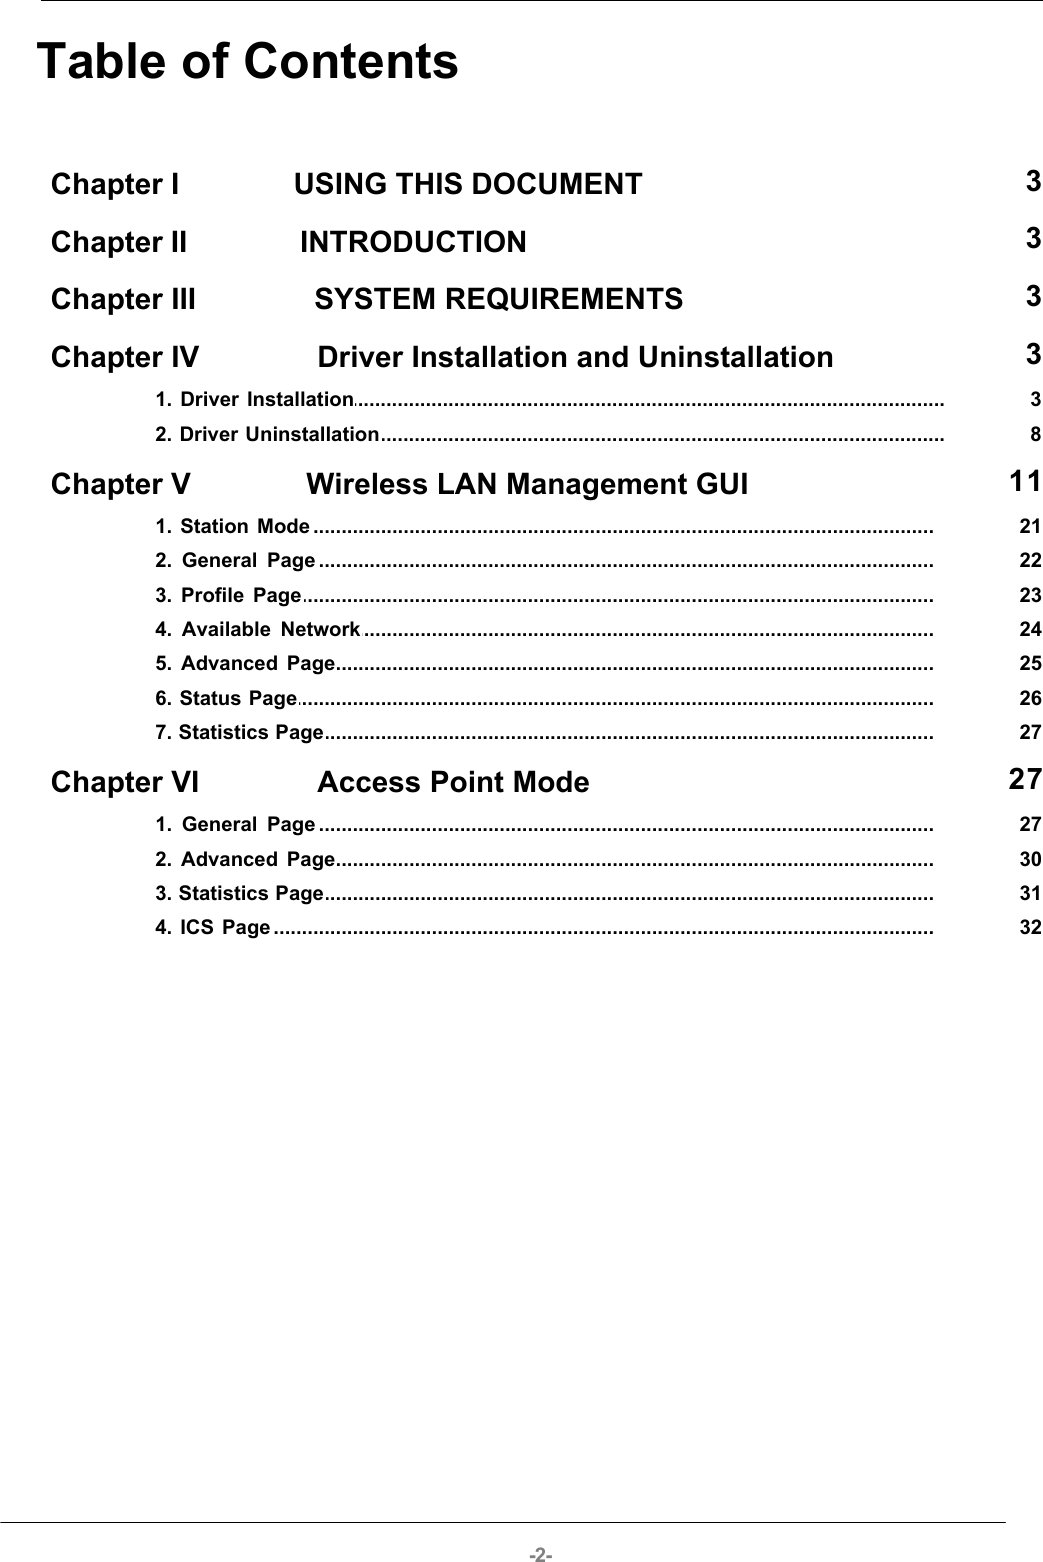 -2-Table of ContentsChapter I              USING THIS DOCUMENT  3Chapter II              INTRODUCTION  3Chapter III              SYSTEM REQUIREMENTS  3Chapter IV              Driver Installation and Uninstallation  3................................................................................................................................... 31. Driver Installation................................................................................................................................... 82. Driver UninstallationChapter V              Wireless LAN Management GUI  11................................................................................................................................... 211. Station Mode................................................................................................................................... 222. General Page................................................................................................................................... 233. Profile Page................................................................................................................................... 244. Available Network................................................................................................................................... 255. Advanced Page................................................................................................................................... 266. Status Page................................................................................................................................... 277. Statistics PageChapter VI              Access Point Mode  27................................................................................................................................... 271. General Page................................................................................................................................... 302. Advanced Page................................................................................................................................... 313. Statistics Page................................................................................................................................... 324. ICS Page